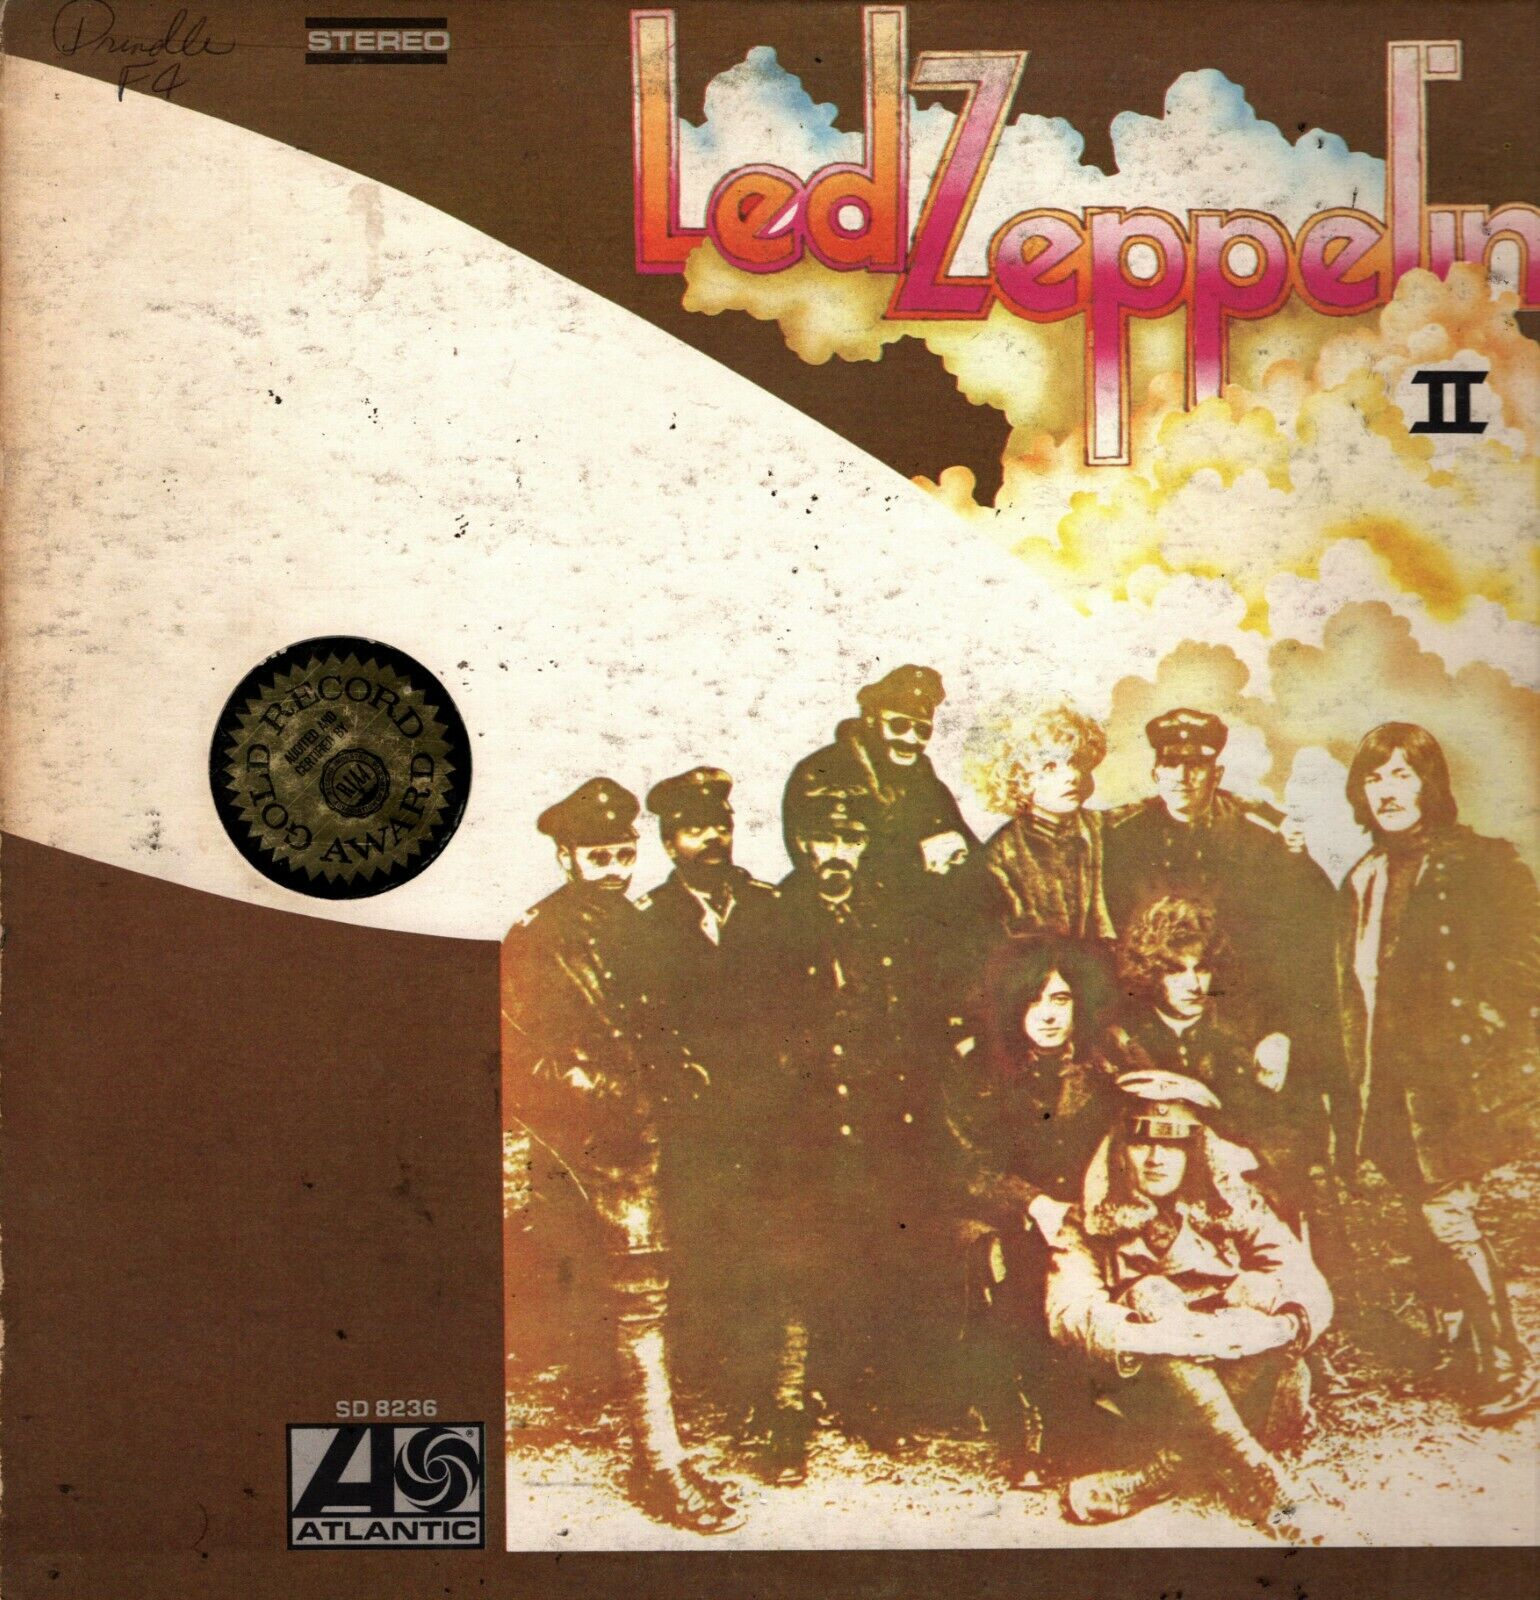 Led Zeppelin Limited Edition Picture Disc CD Rare Collectible Music Display  - Gold Record Outlet Album and Disc Collectible Memorabilia